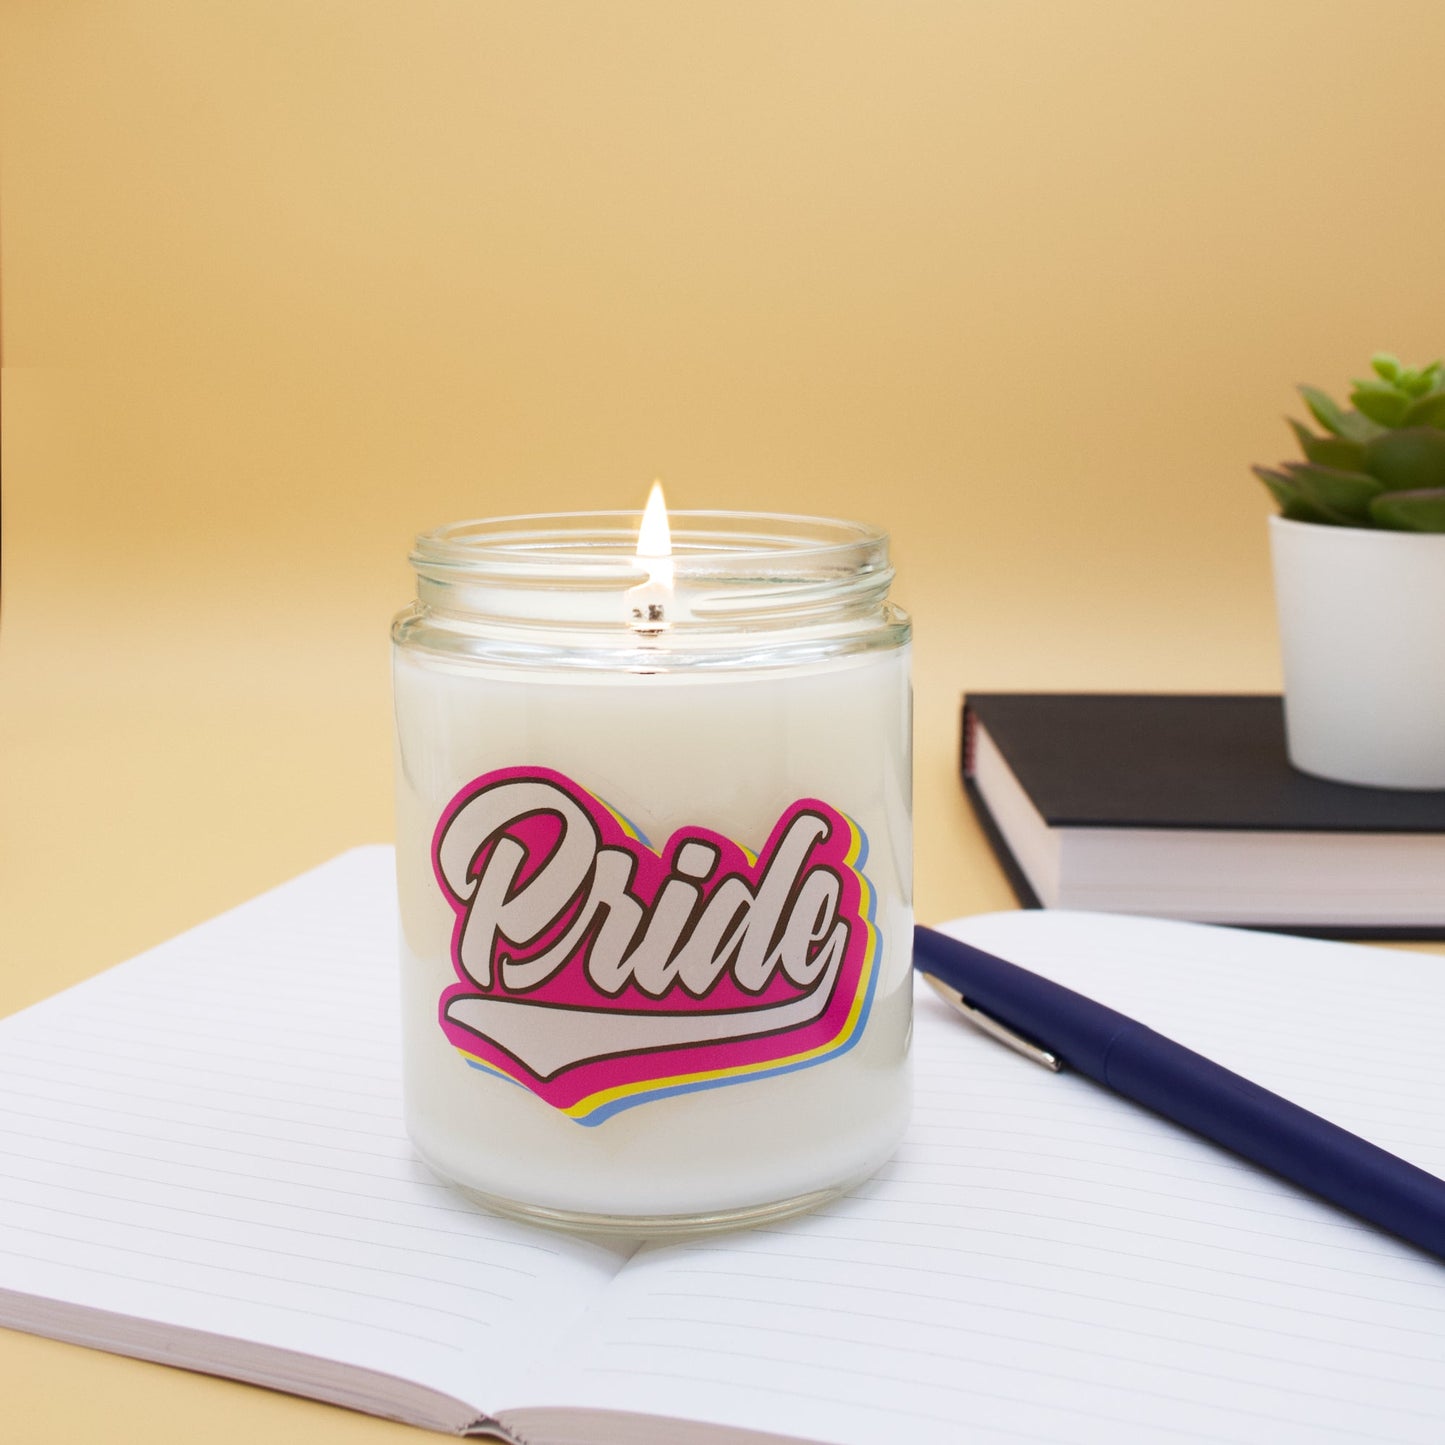 Retro Pride - Pansexual - Scented Candle